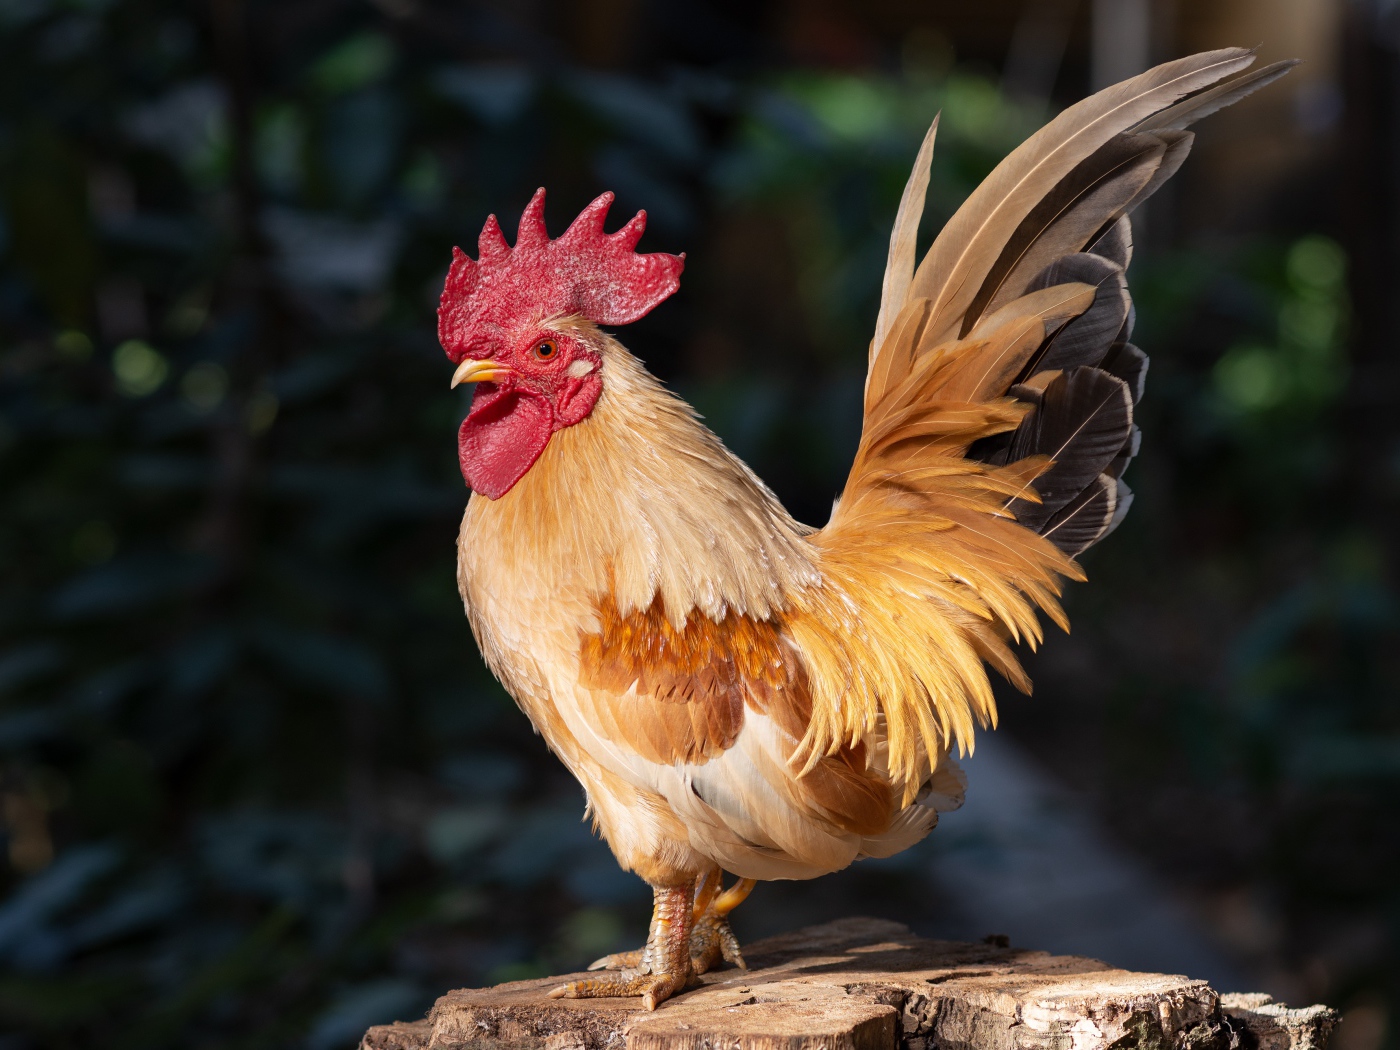 A beautiful domestic rooster stands on a tree stump in the sun